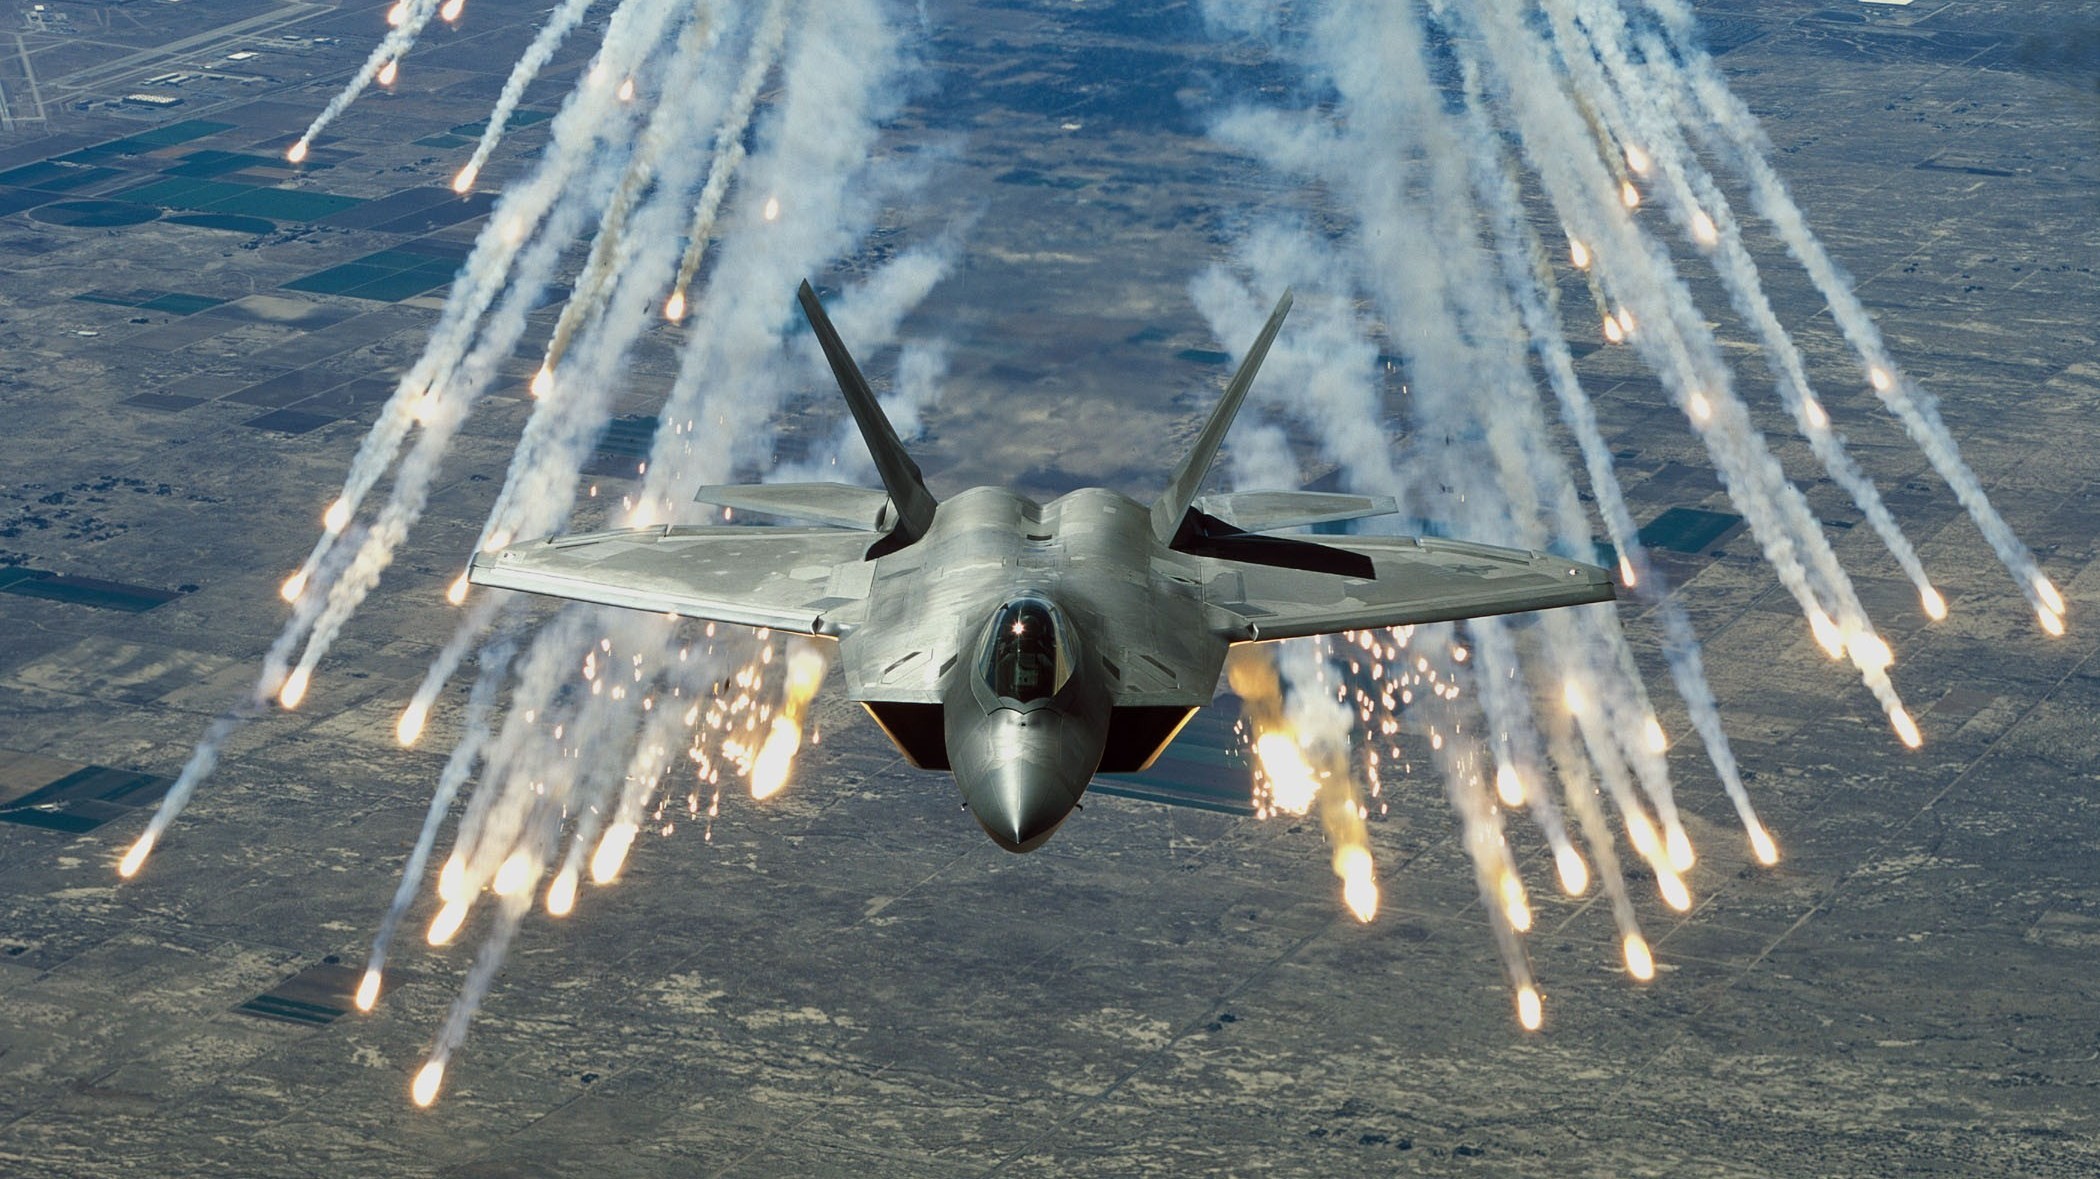 Jet Fighter Airplane Contrails F 22 Raptor Military 2100x1179